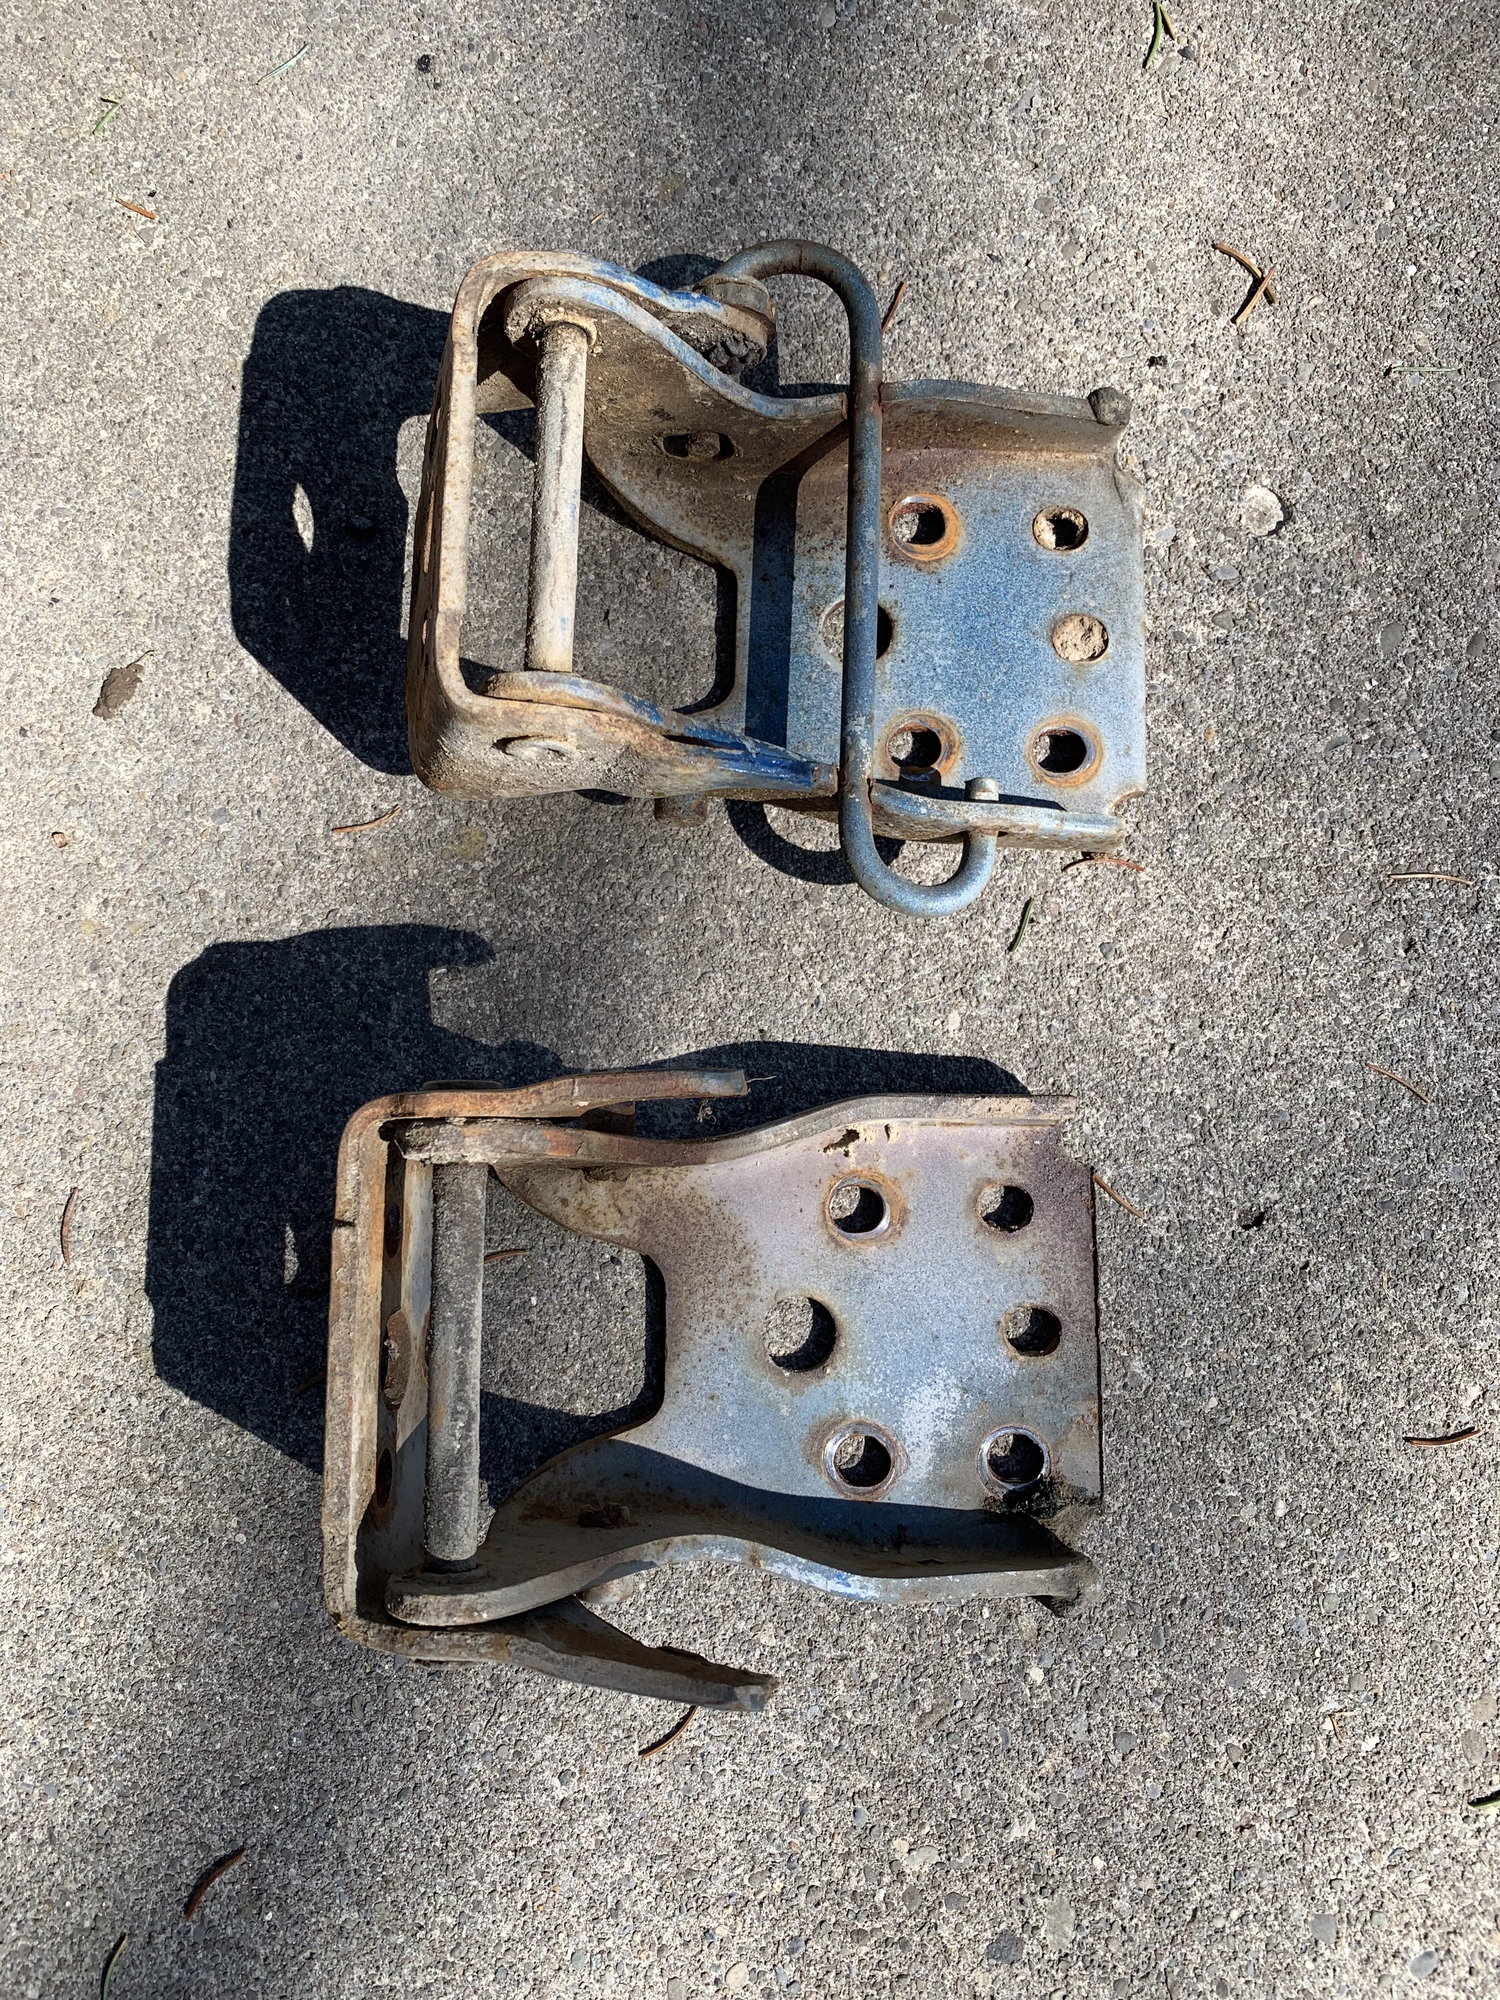 Miscellaneous - 73-79 Ford Truck Parts - Body Parts, Interior, Drivetrain, Engines, Transmissions, Accessories, Etc. - Used - 1973 to 1979 Ford All Models - Binghamton, NY 13904, United States